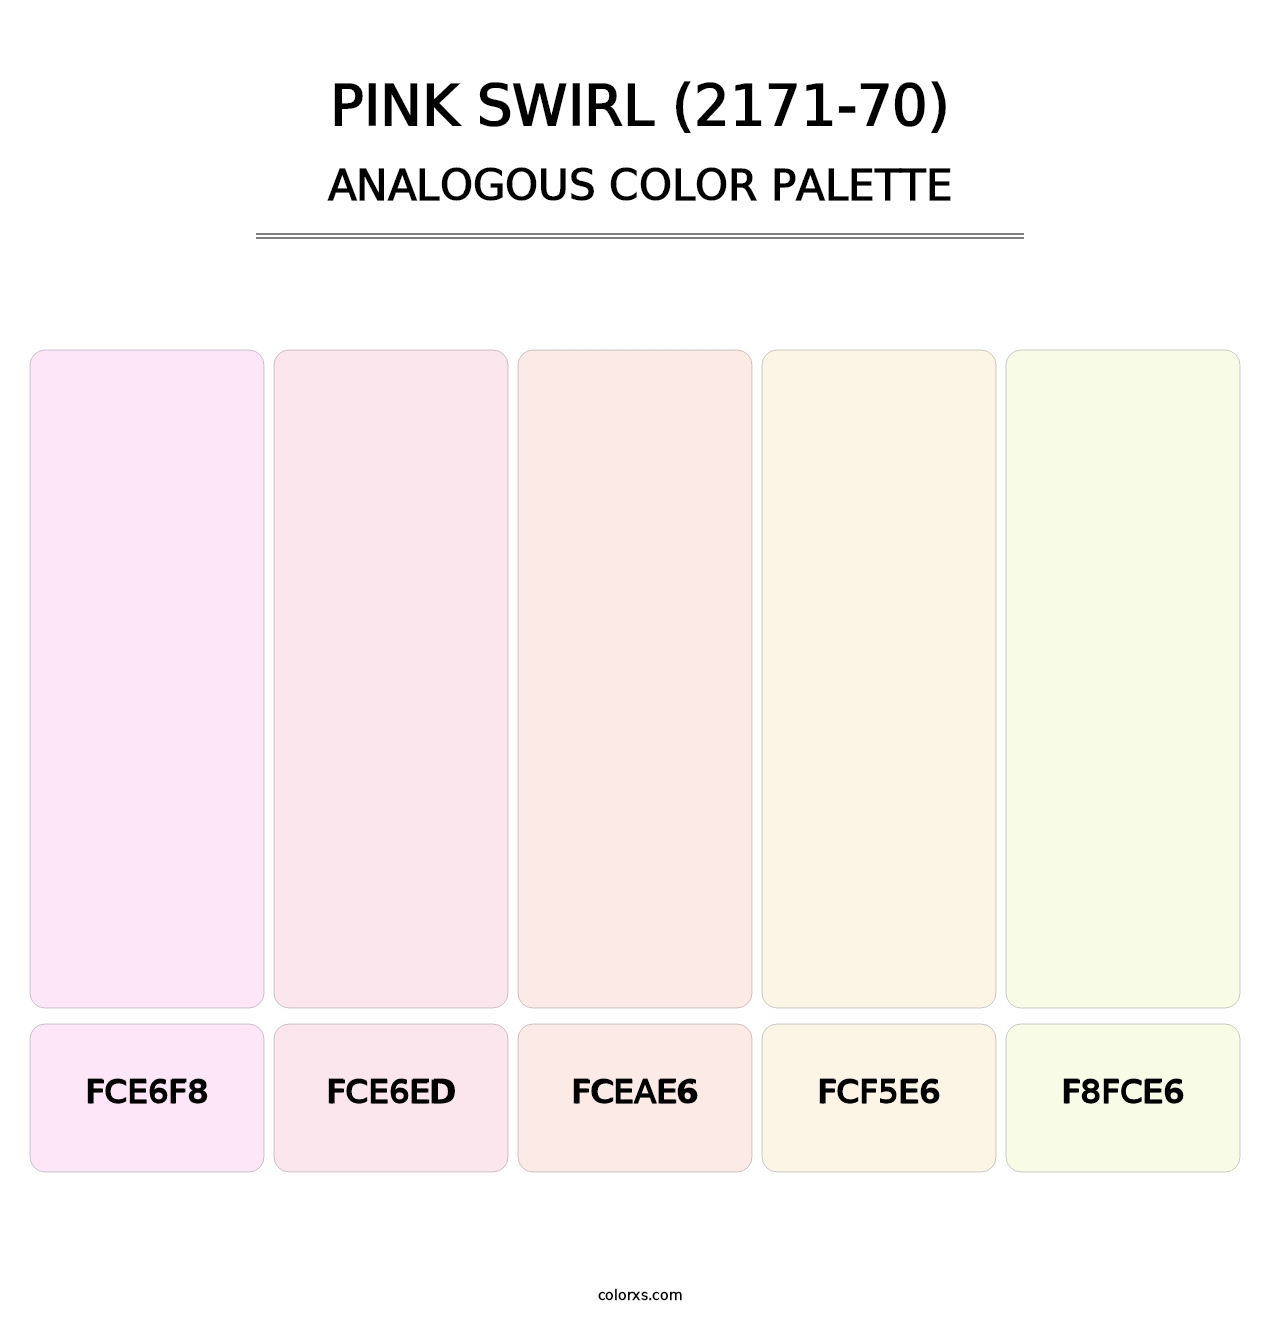 Pink Swirl (2171-70) - Analogous Color Palette